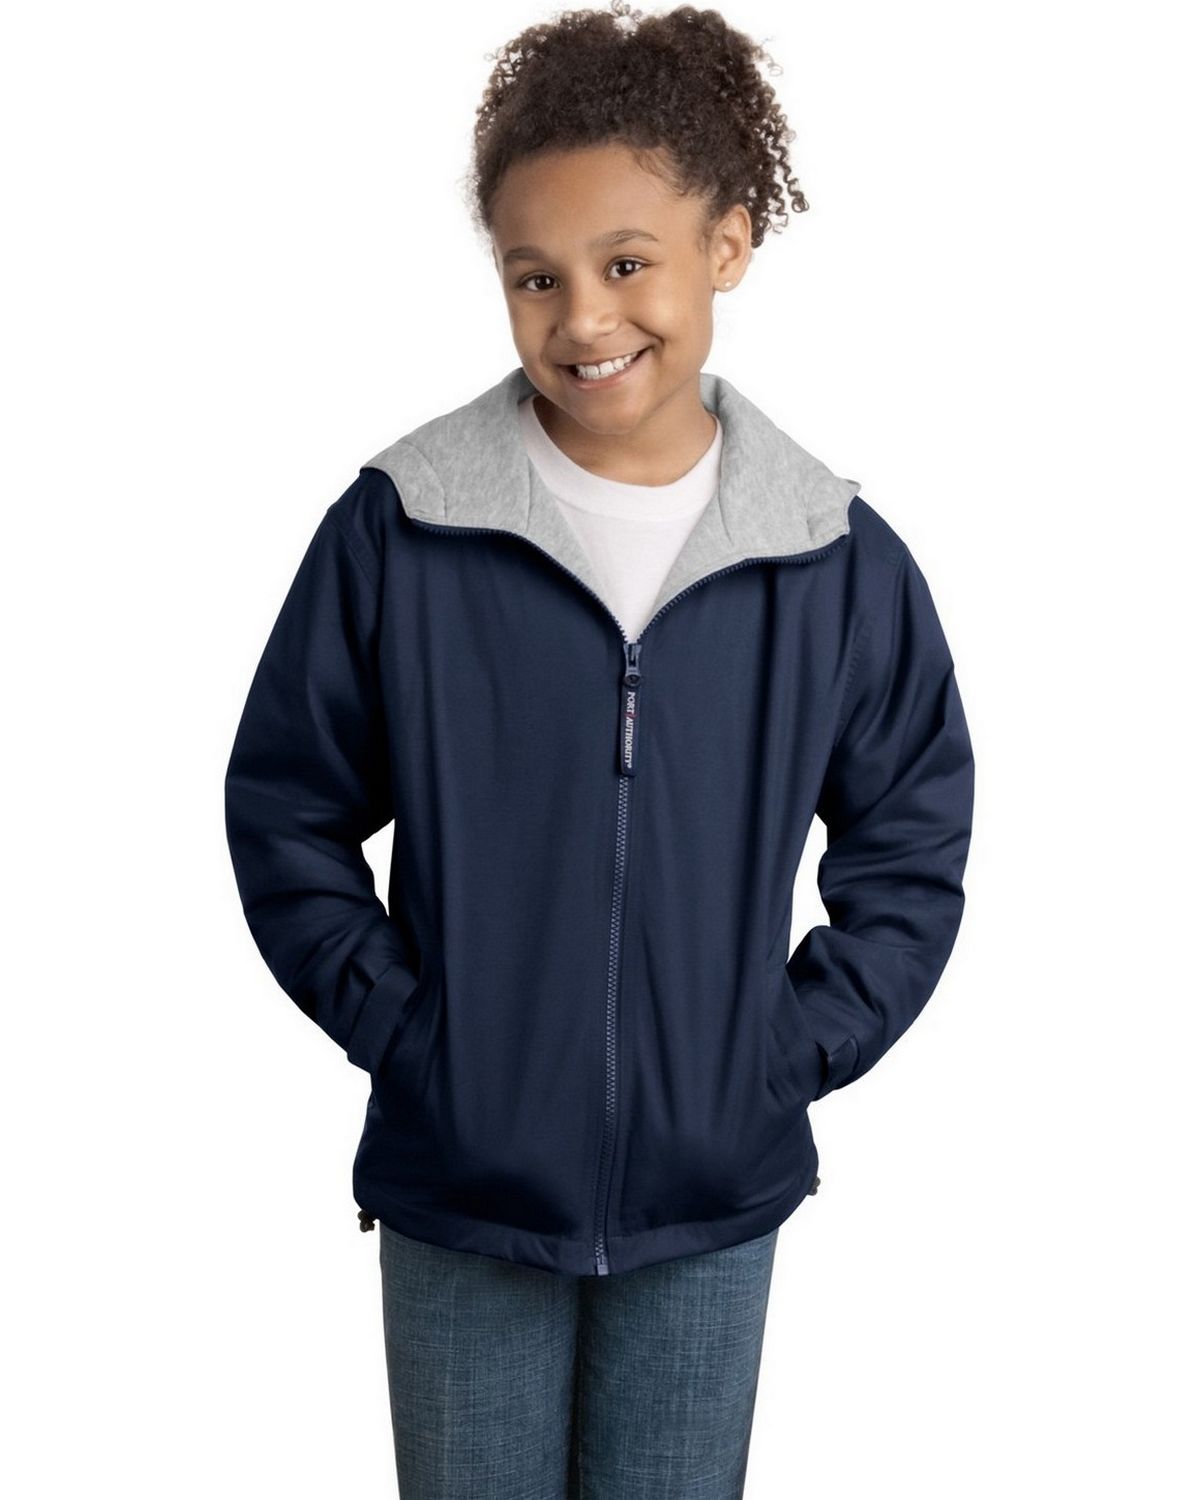 Port Authority YJP56 Youth Team Jacket - Shop at ApparelnBags.com